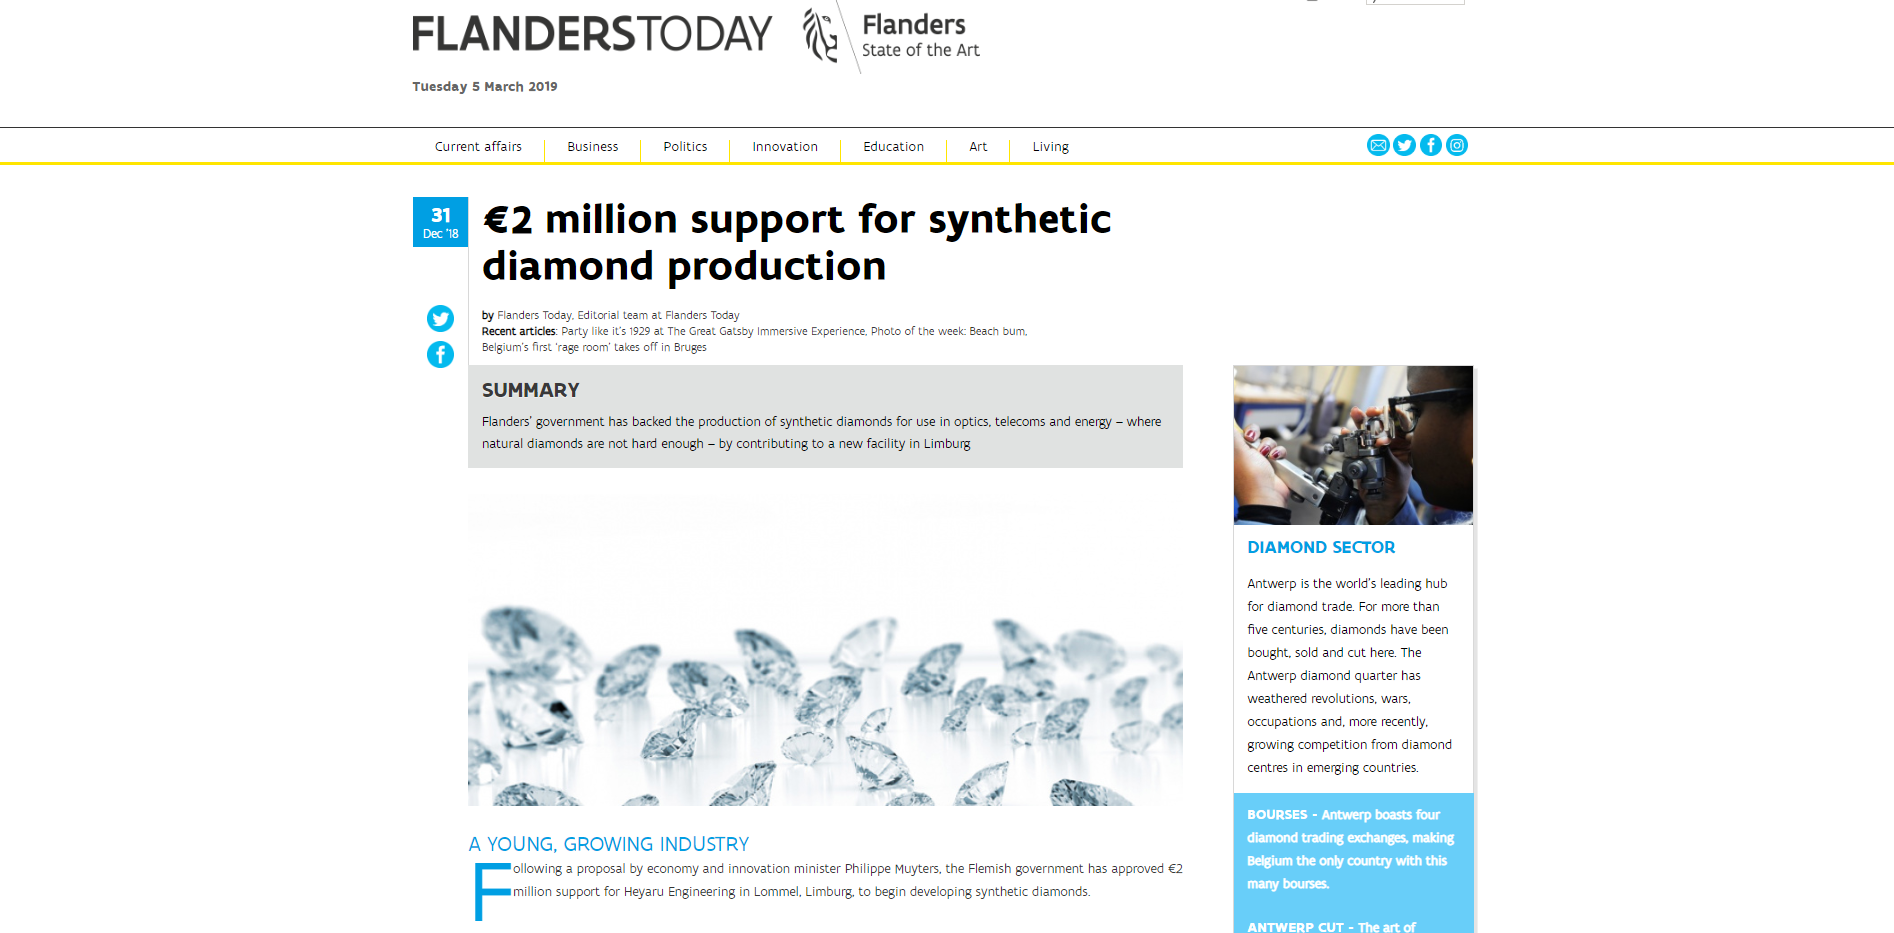 €2 million support for synthetic diamond production</p>
<p>